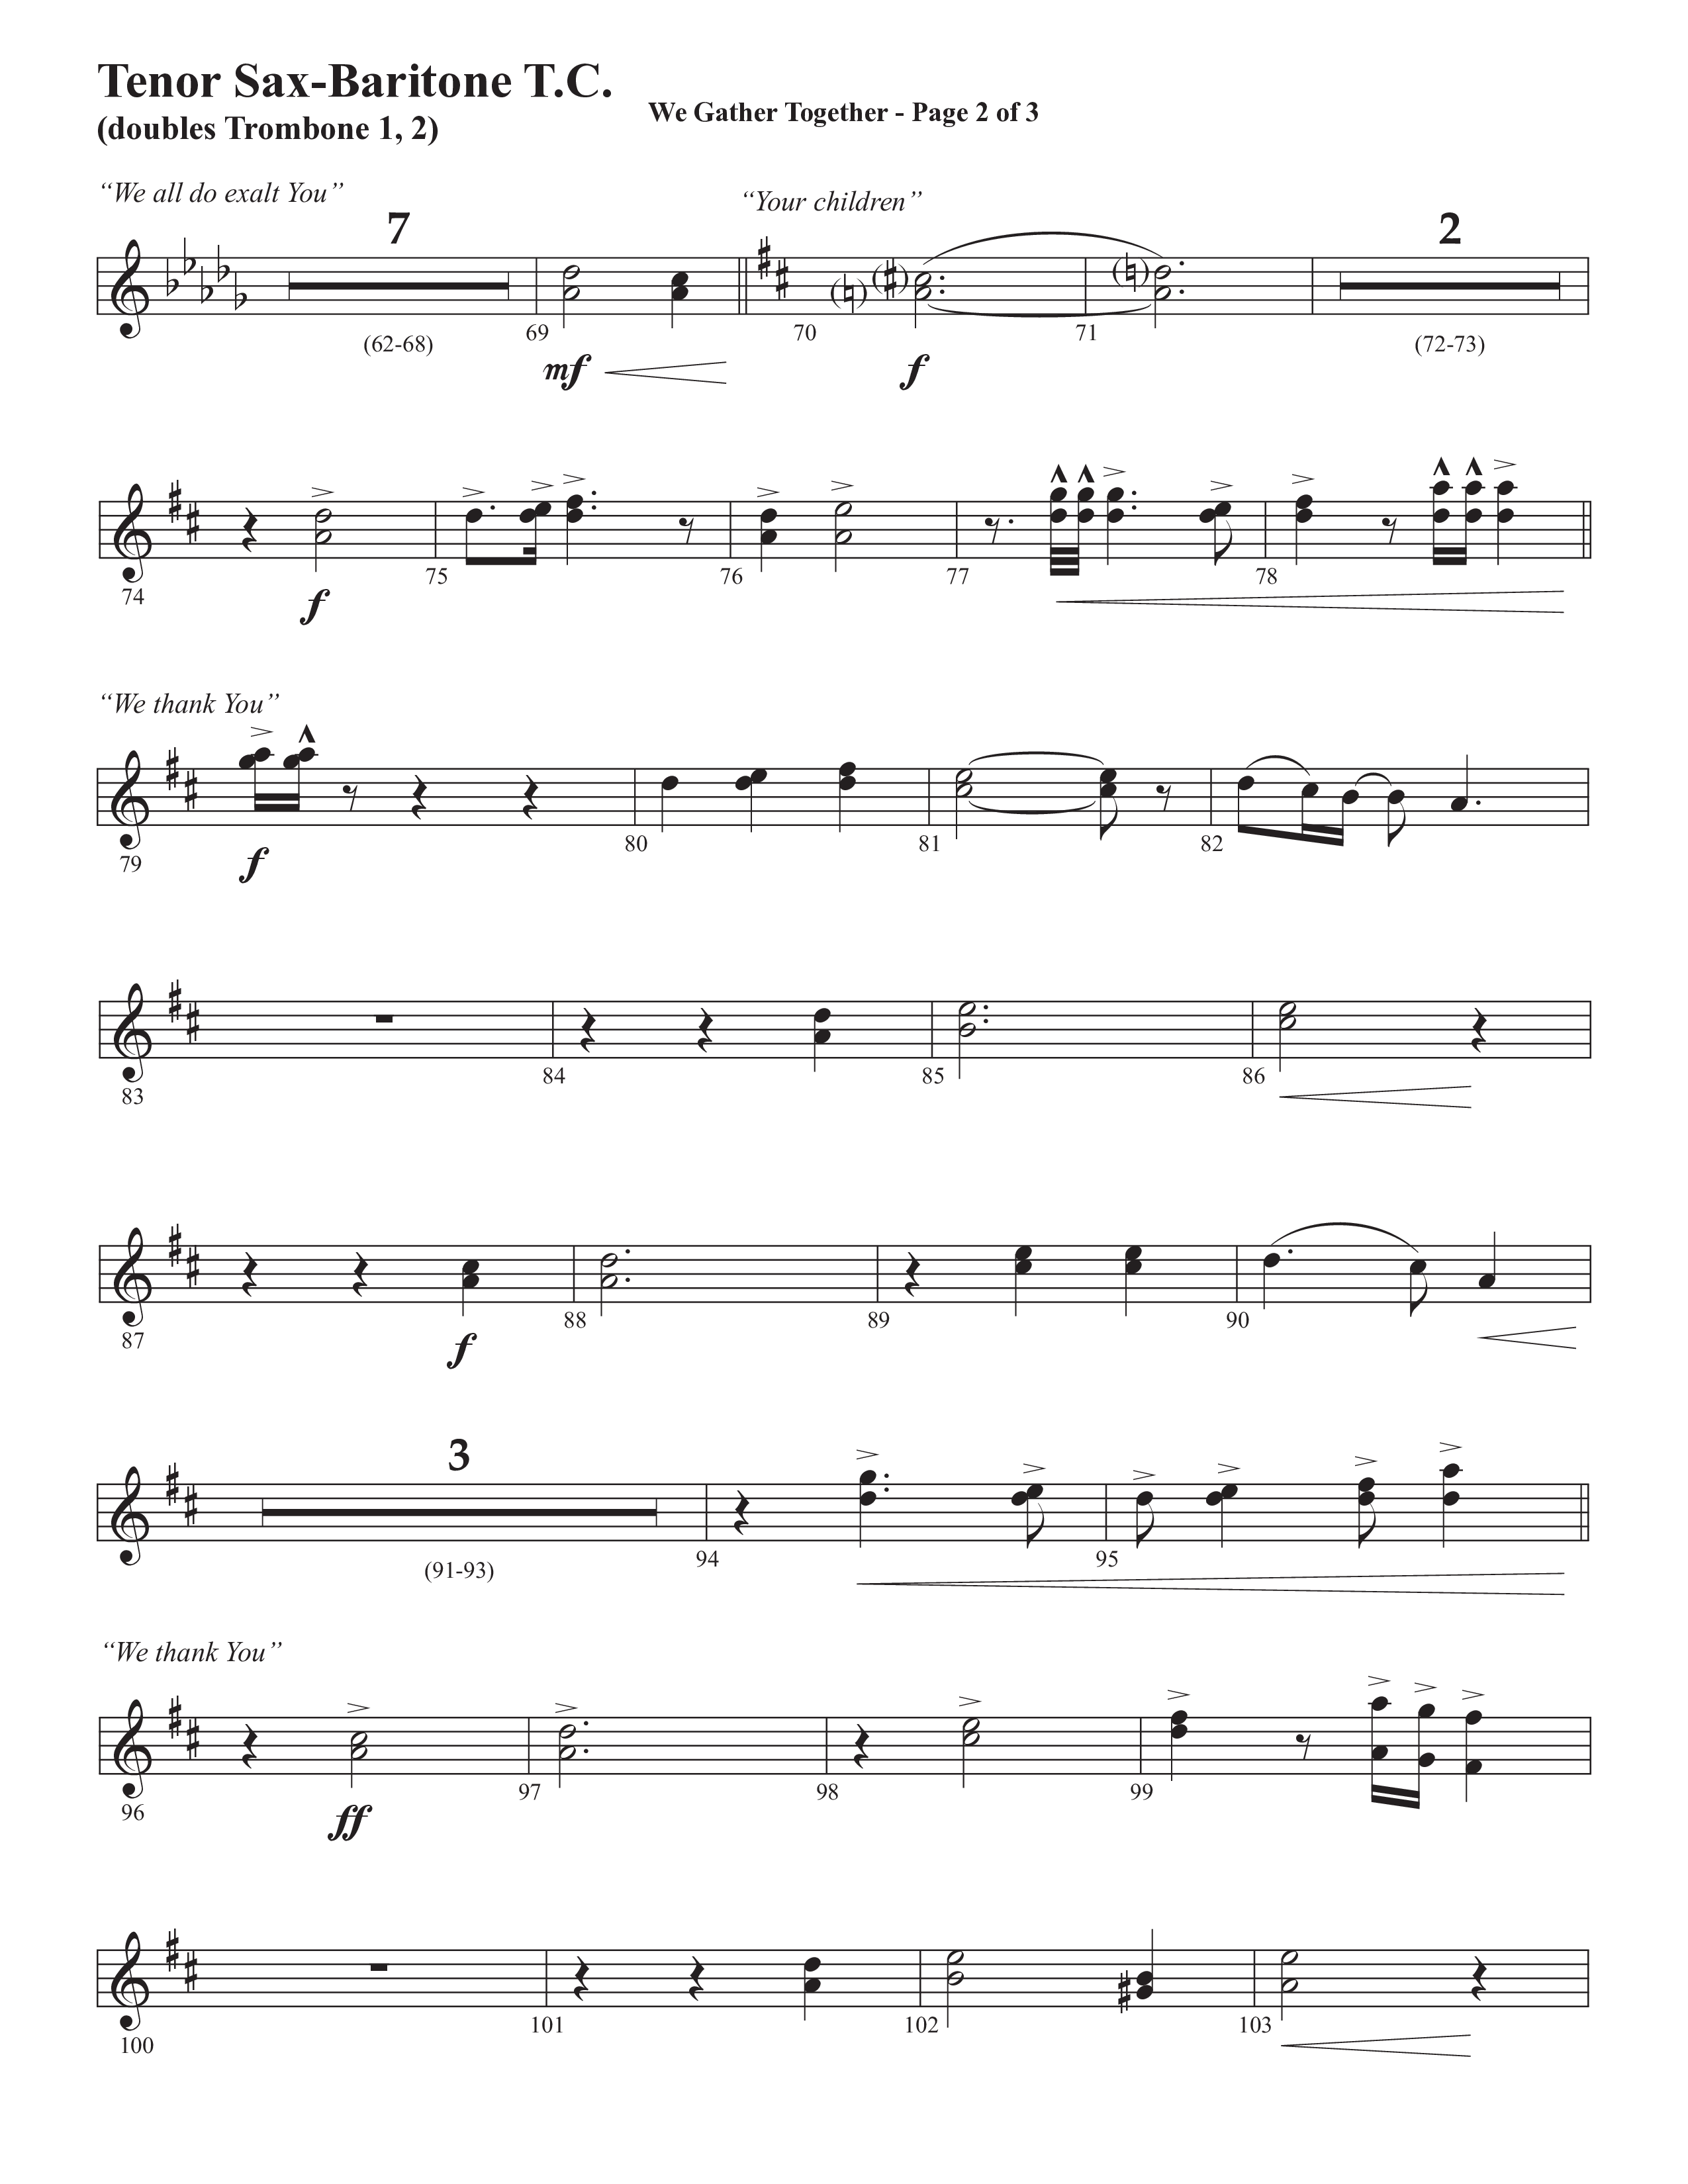 We Gather Together (We Thank You) (Choral Anthem SATB) Tenor Sax/Baritone T.C. (Semsen Music / Arr. John Bolin / Orch. Cliff Duren)